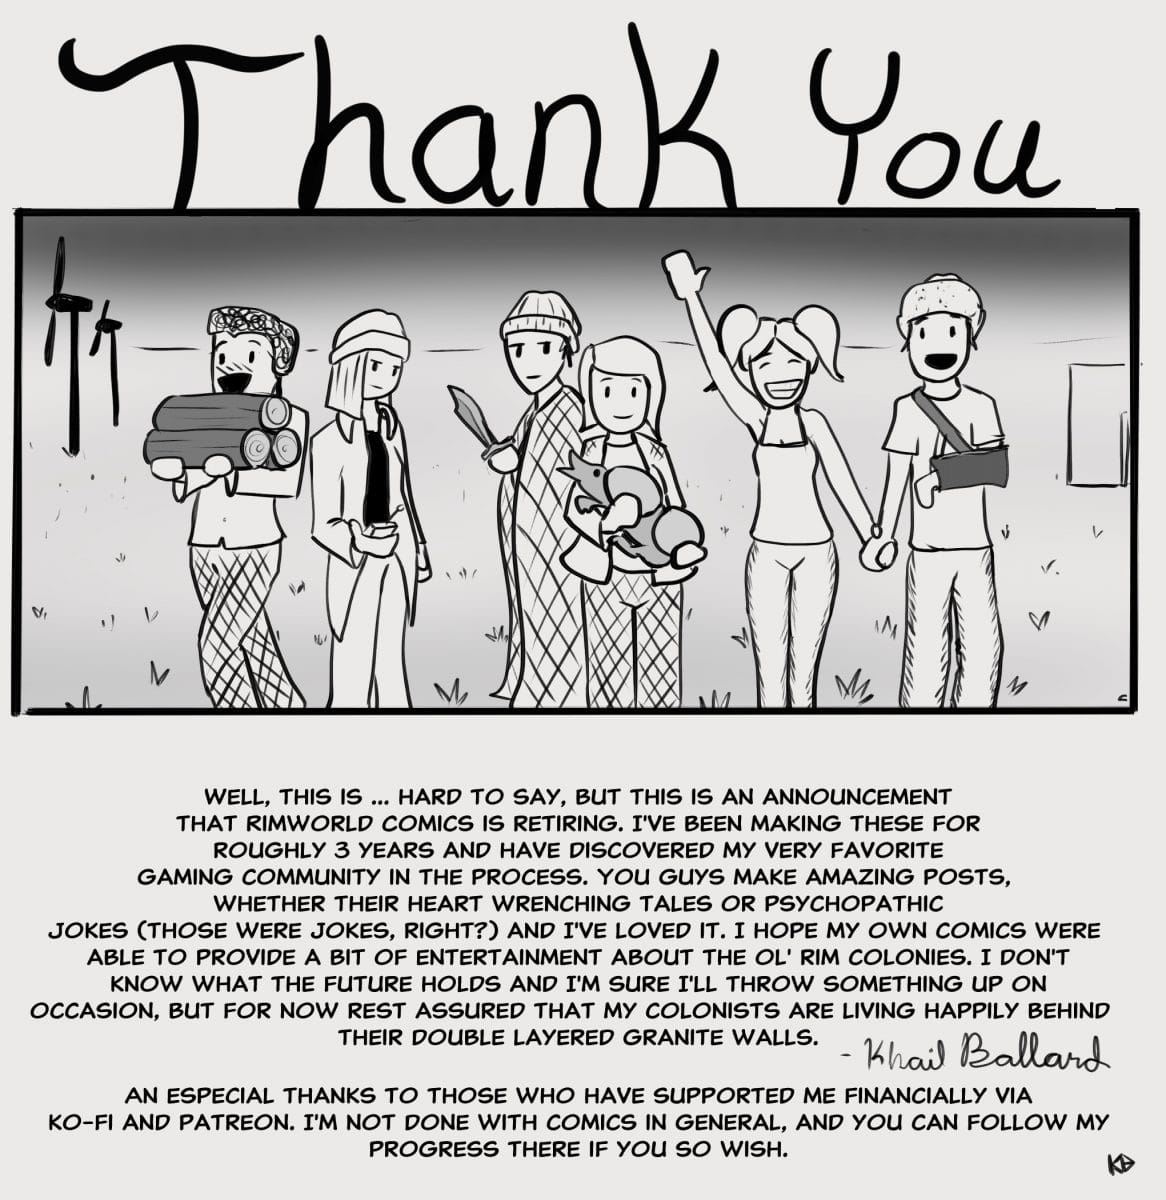 D X. Y ‘a... Wit I I ,. 0.!.  . Well, This Is  Hard To Say, But This Is An Announcement That Rimworld Comics Is Retiring. I've Been Making These For Roughly 3 Years And Have Discovered My Very Favorite Gaming Community In The Process. You Guys Make Amazing Posts,. Whether Their Heart Wrenching Tales Or Psychopathic. Jokes (those Were Jokes, Right?) And I've Loved It. I Hope My Own Comics Were Able To Provide A Bit Of Entertainment About The Ol' Rim Colonies. I Don‘t Know What The Future Holds And I'm Sure I'll Throw Something Up On. Occasion, But For Now Rest Assured That My Colonists Are Living Happily Behind. Their Double Layered Granite Walls.   B  9. An Especial Thanks To Those Who Have Supported Me Financially Via Ko-fi And Patreon. I'm Not Done With Comics In General, And You Can Follow My Progress There If You So Wish. W